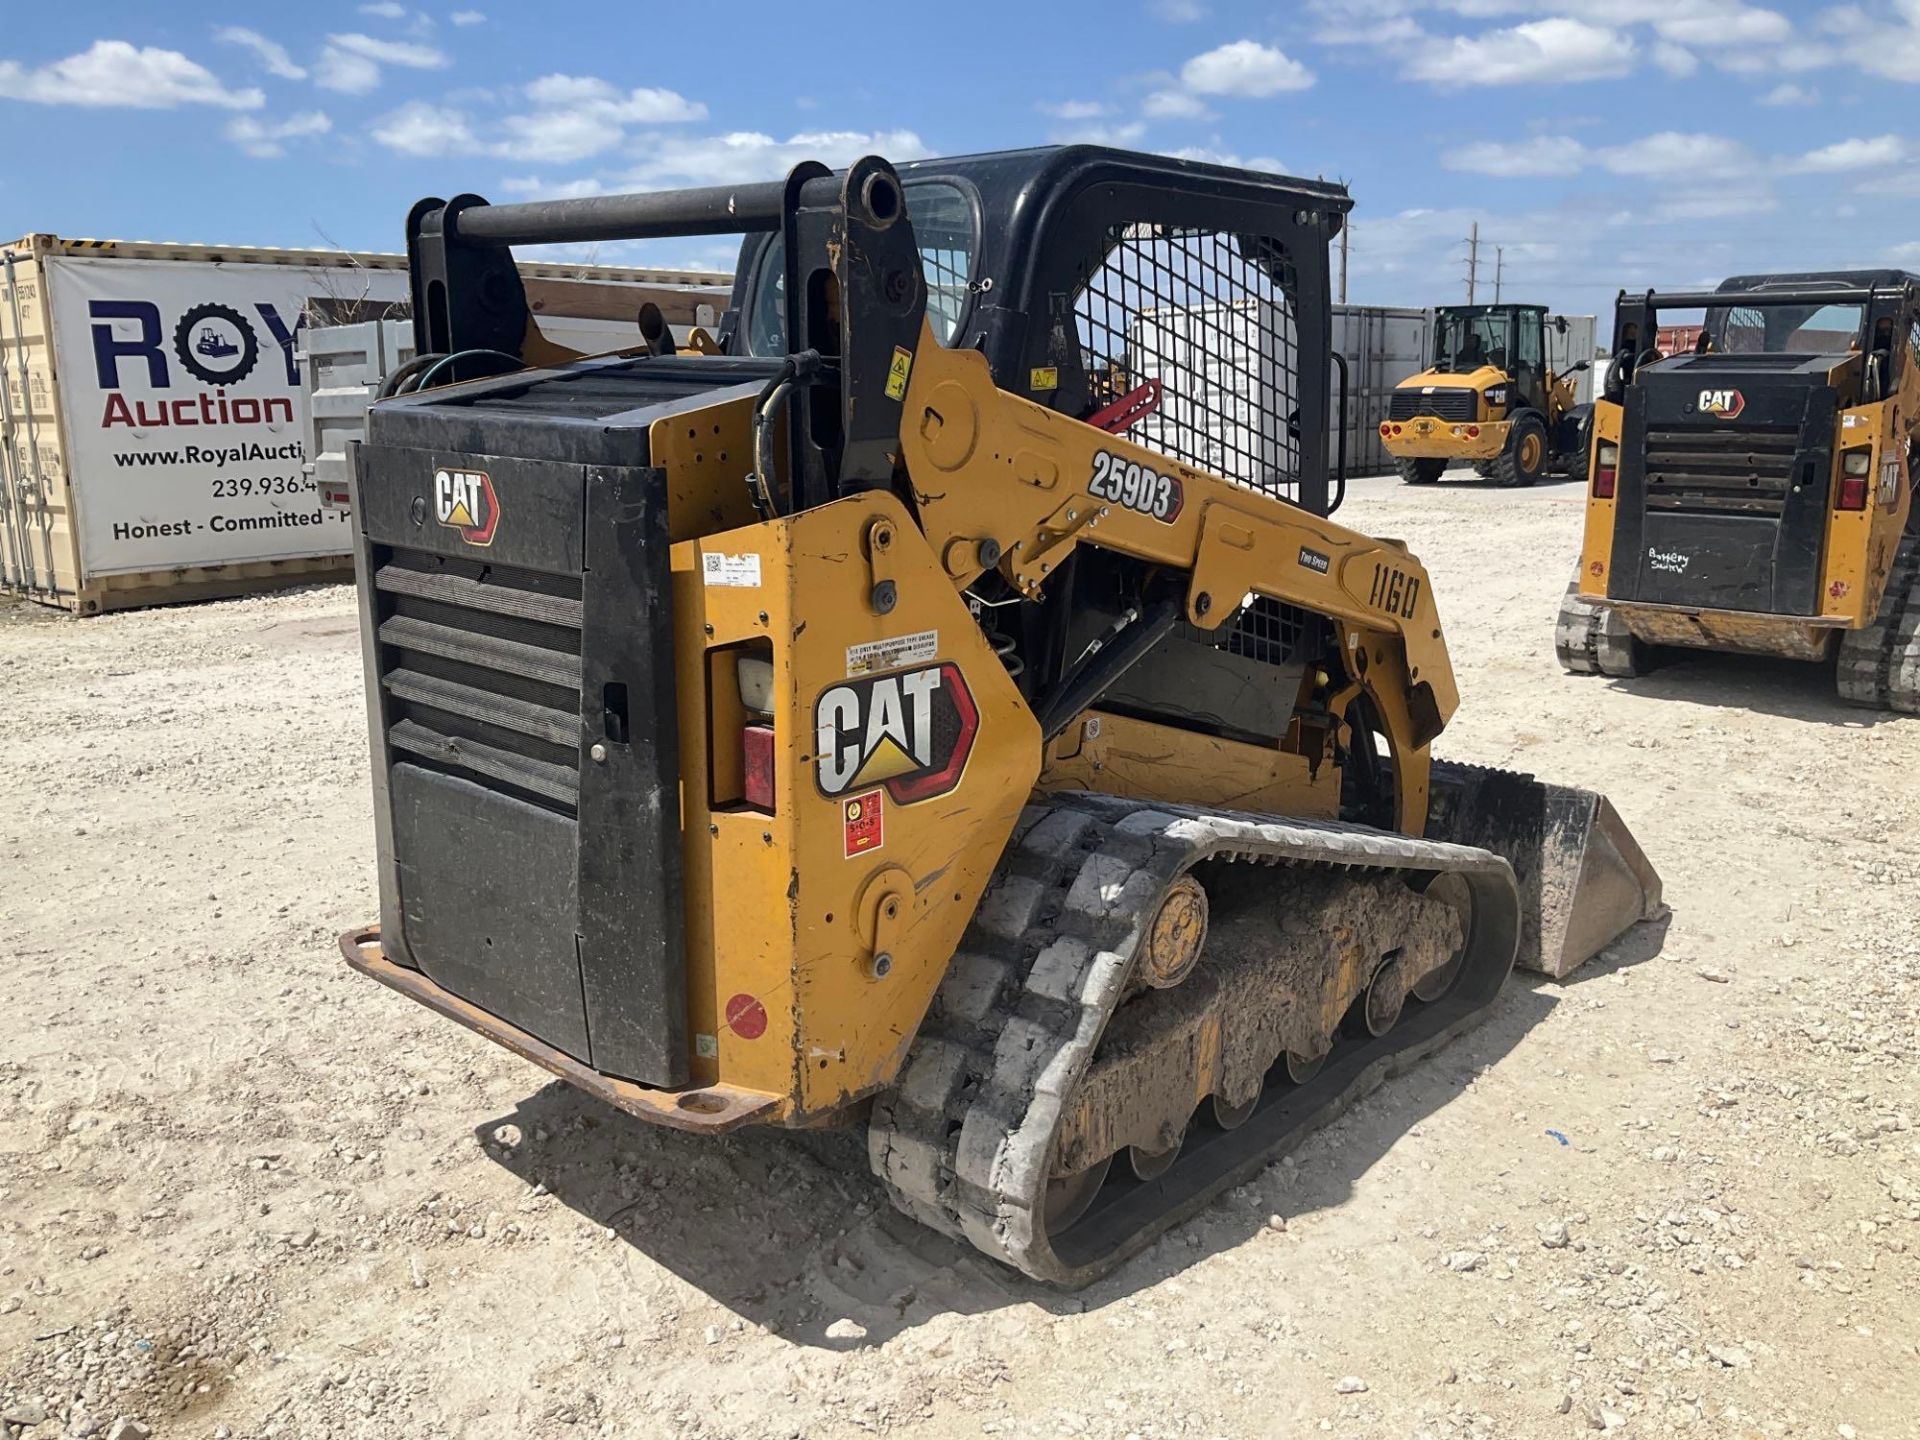 2020 Caterpillar 259D3 Two-Speed Skid Steer Track Loader - Image 3 of 23